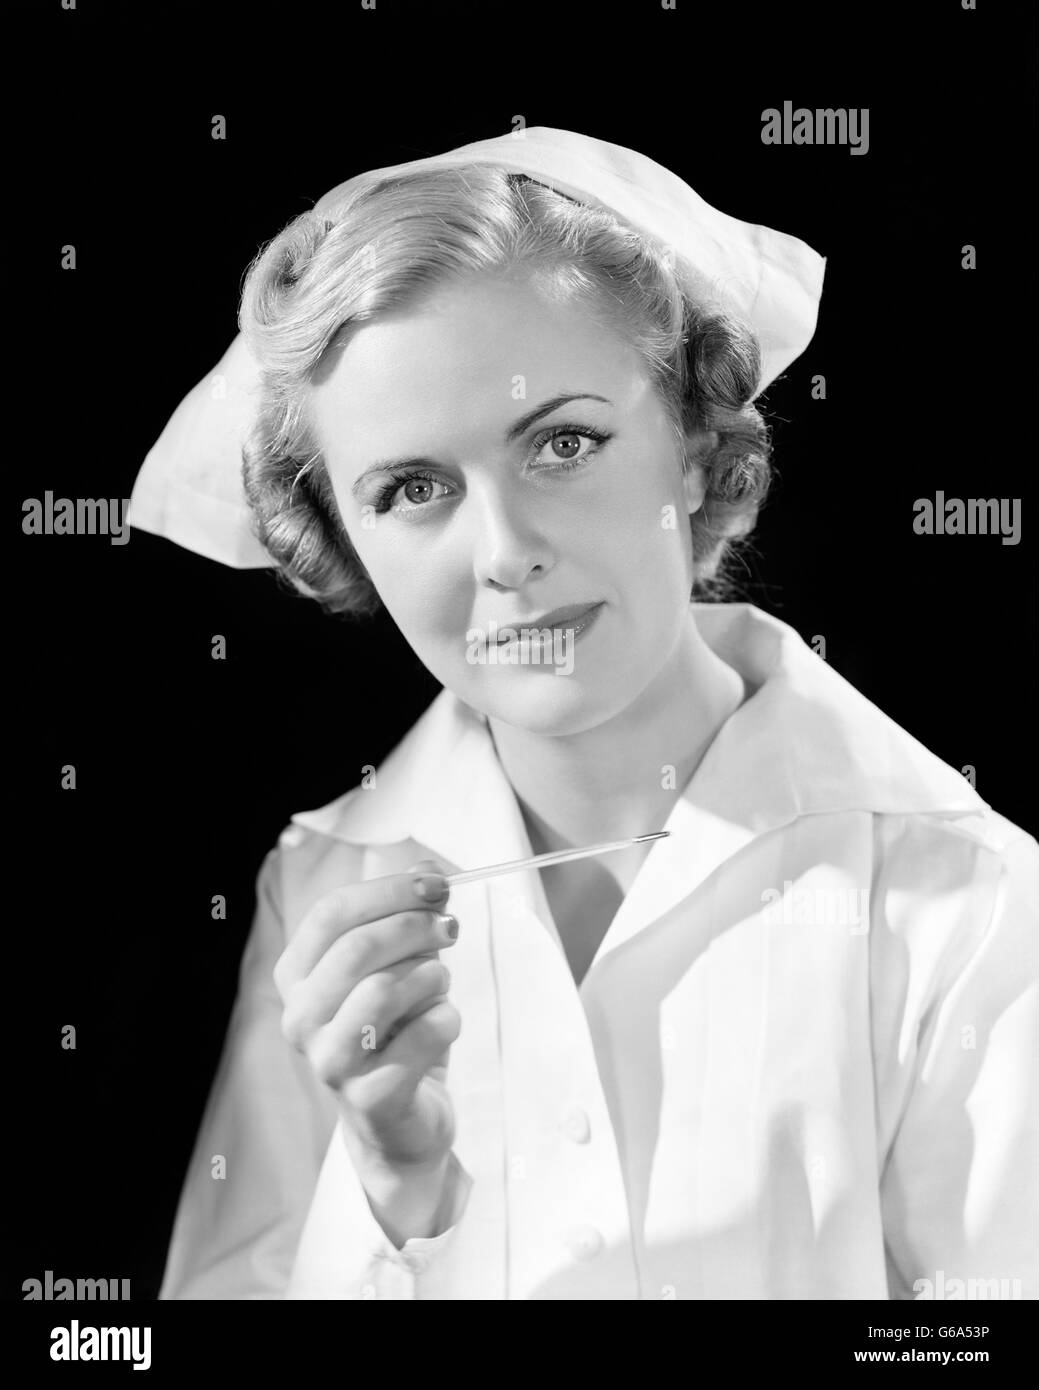 1930s PORTRAIT WOMAN  NURSE HOLDING THERMOMETER LOOKING AT CAMERA Stock Photo